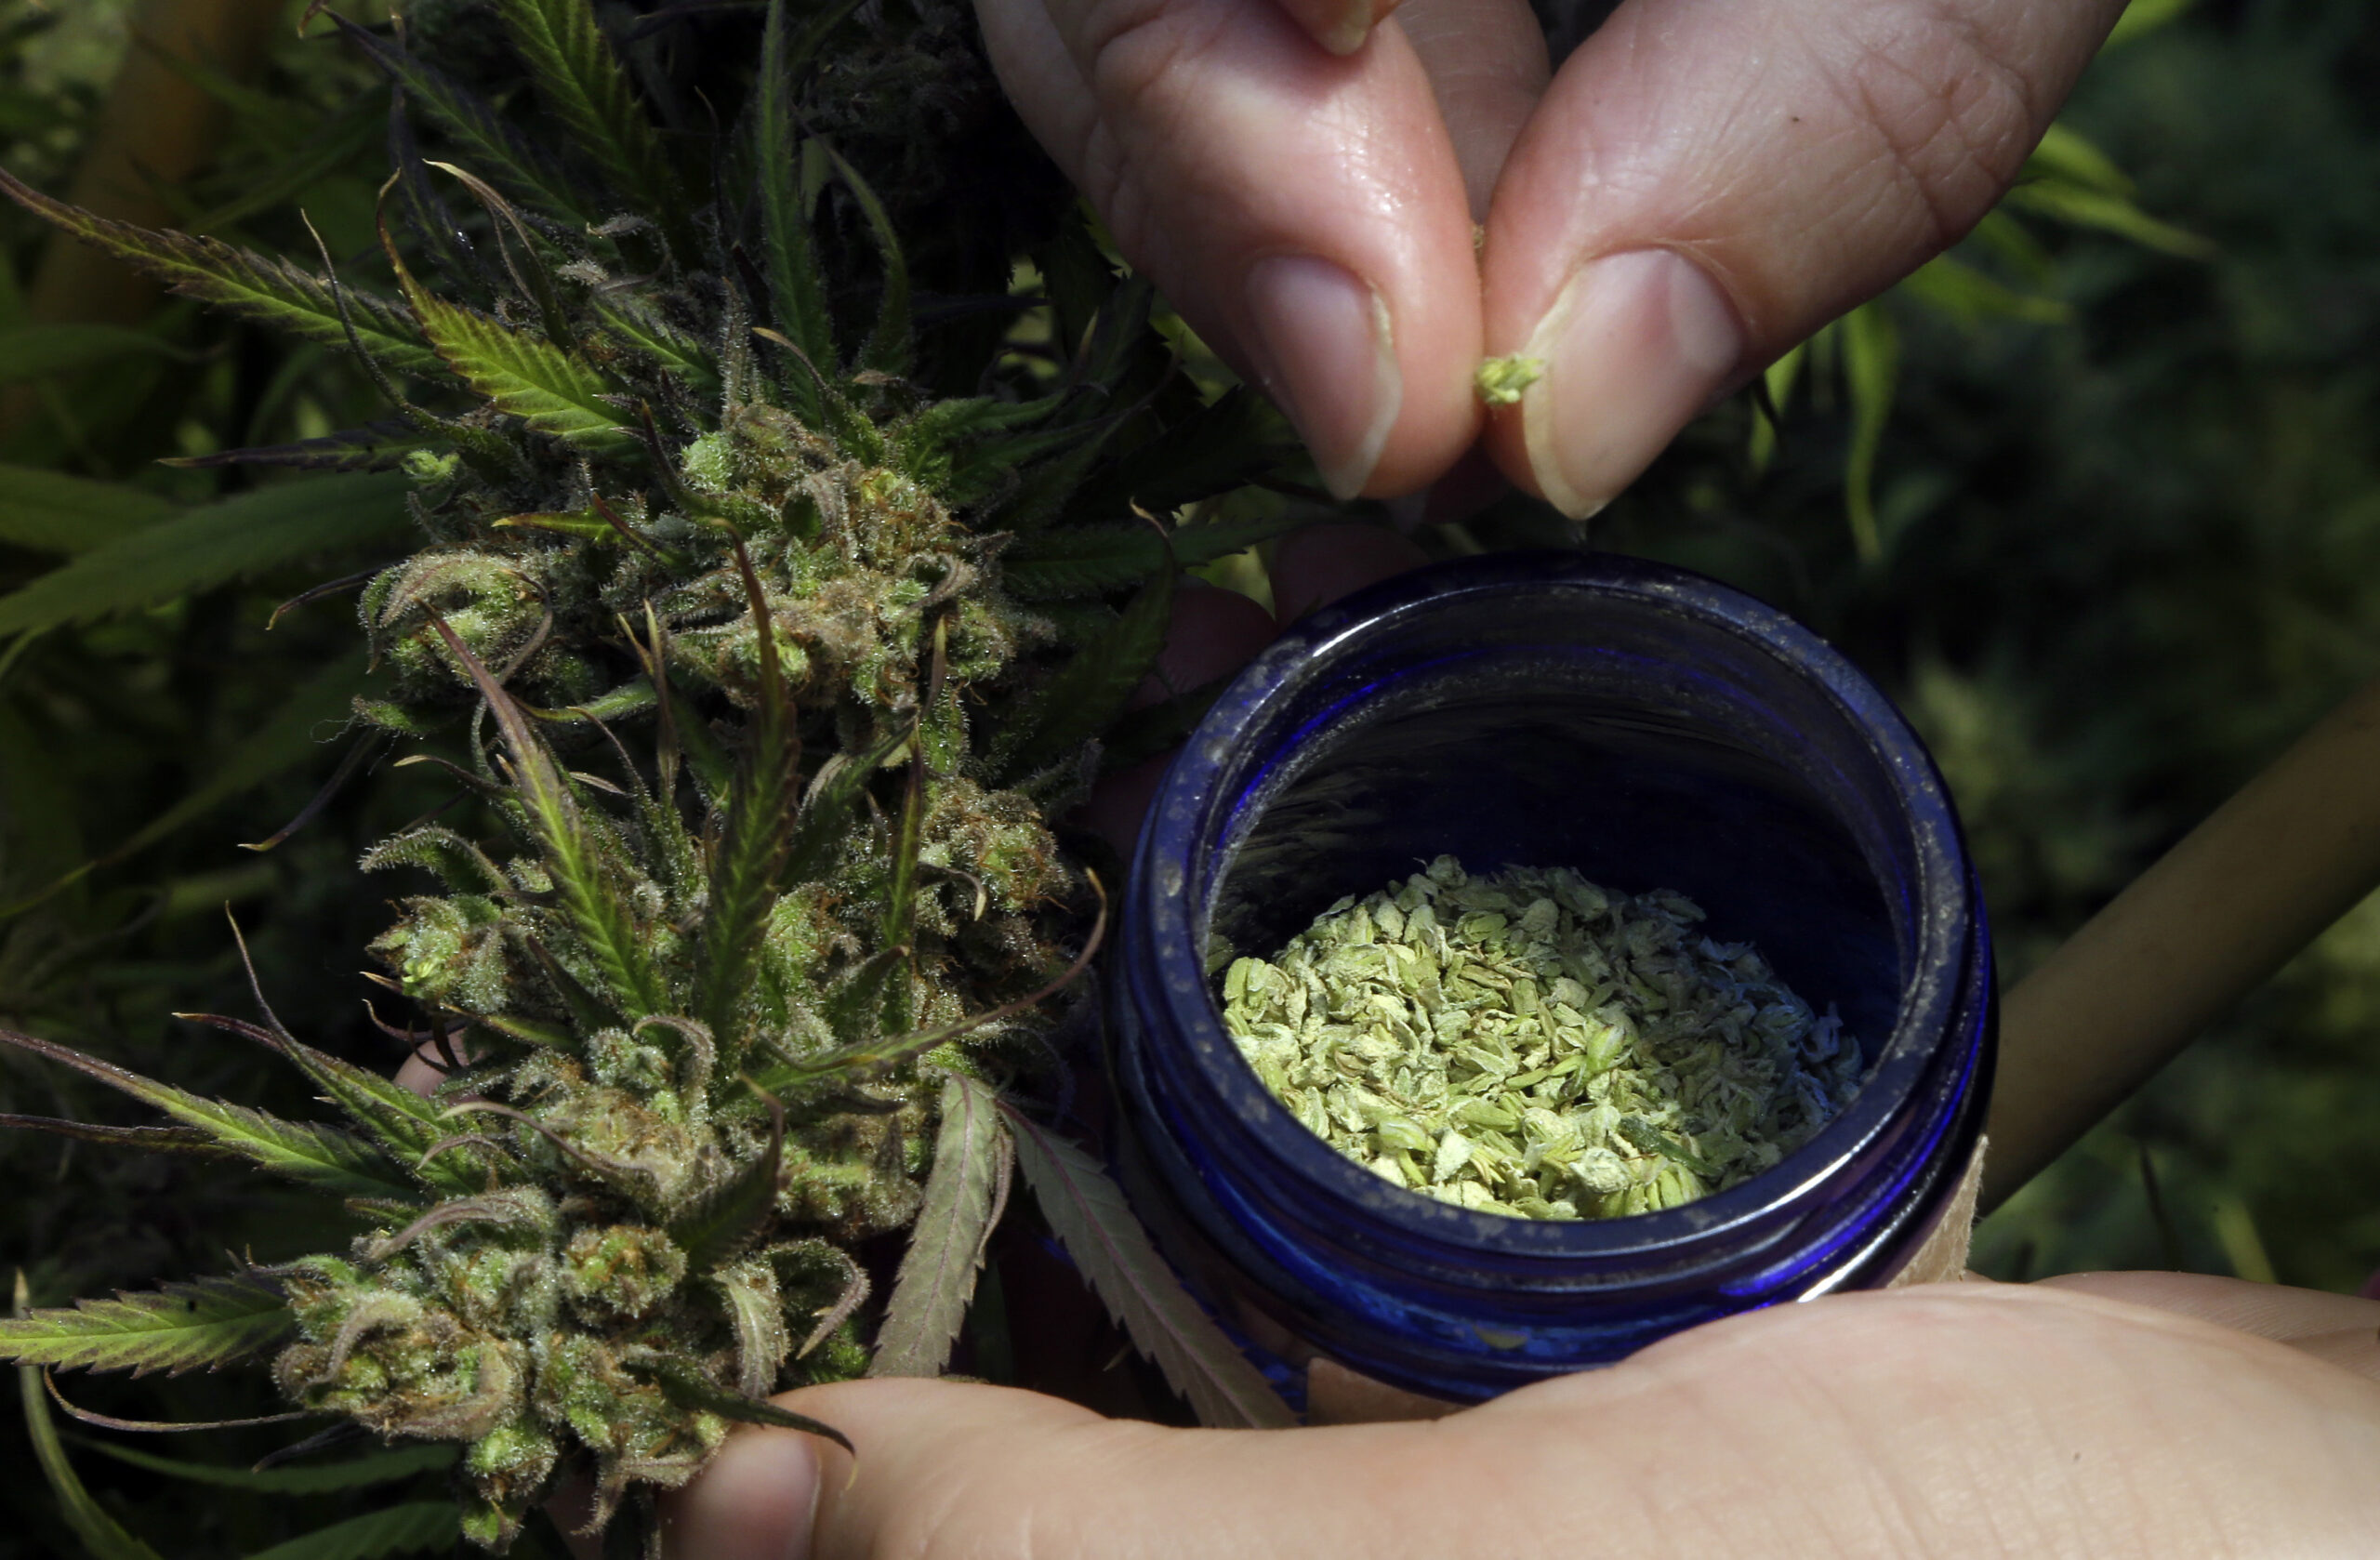 pollen is removed from a hemp plant